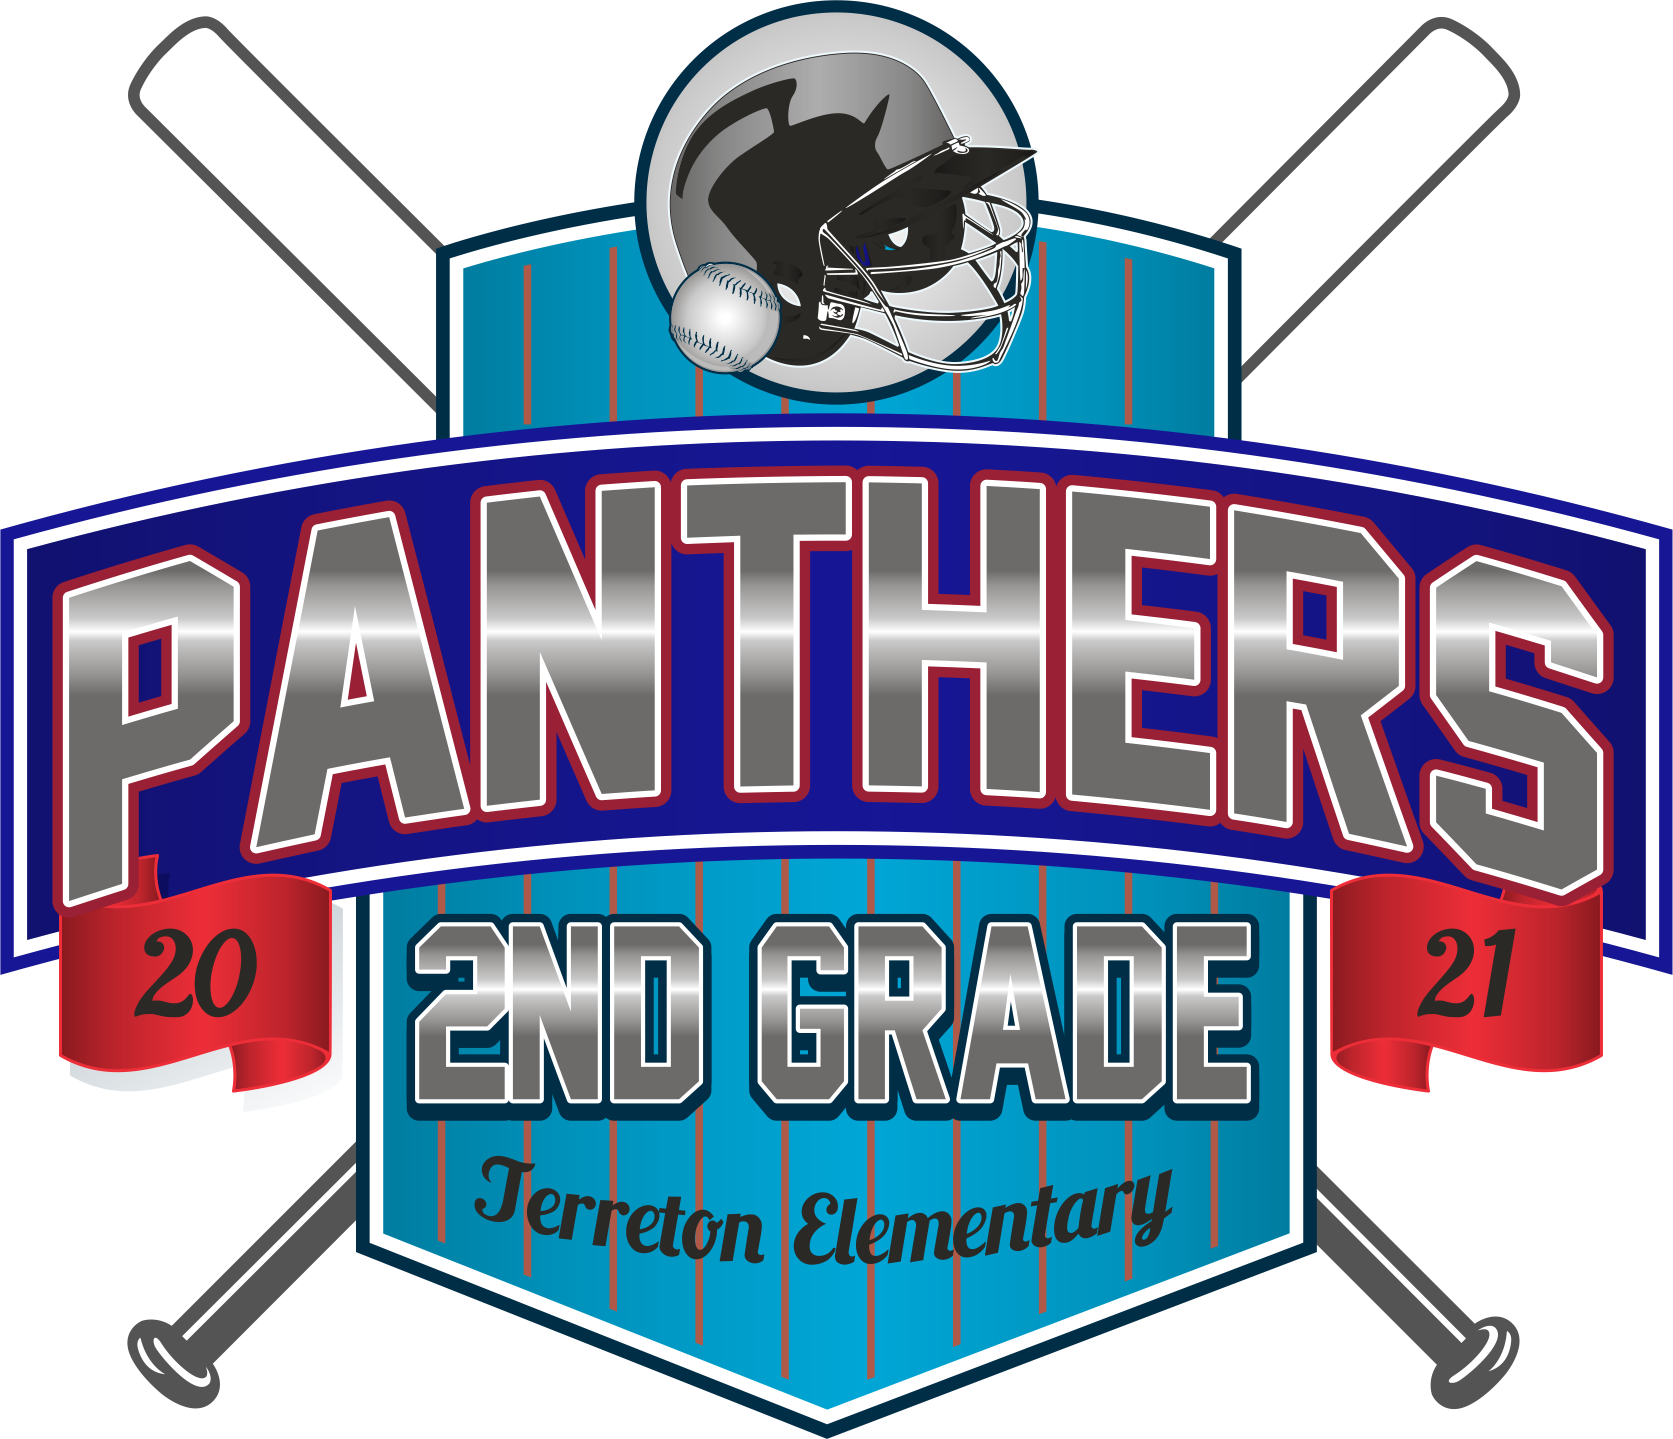 panthers-2nd-grade.png